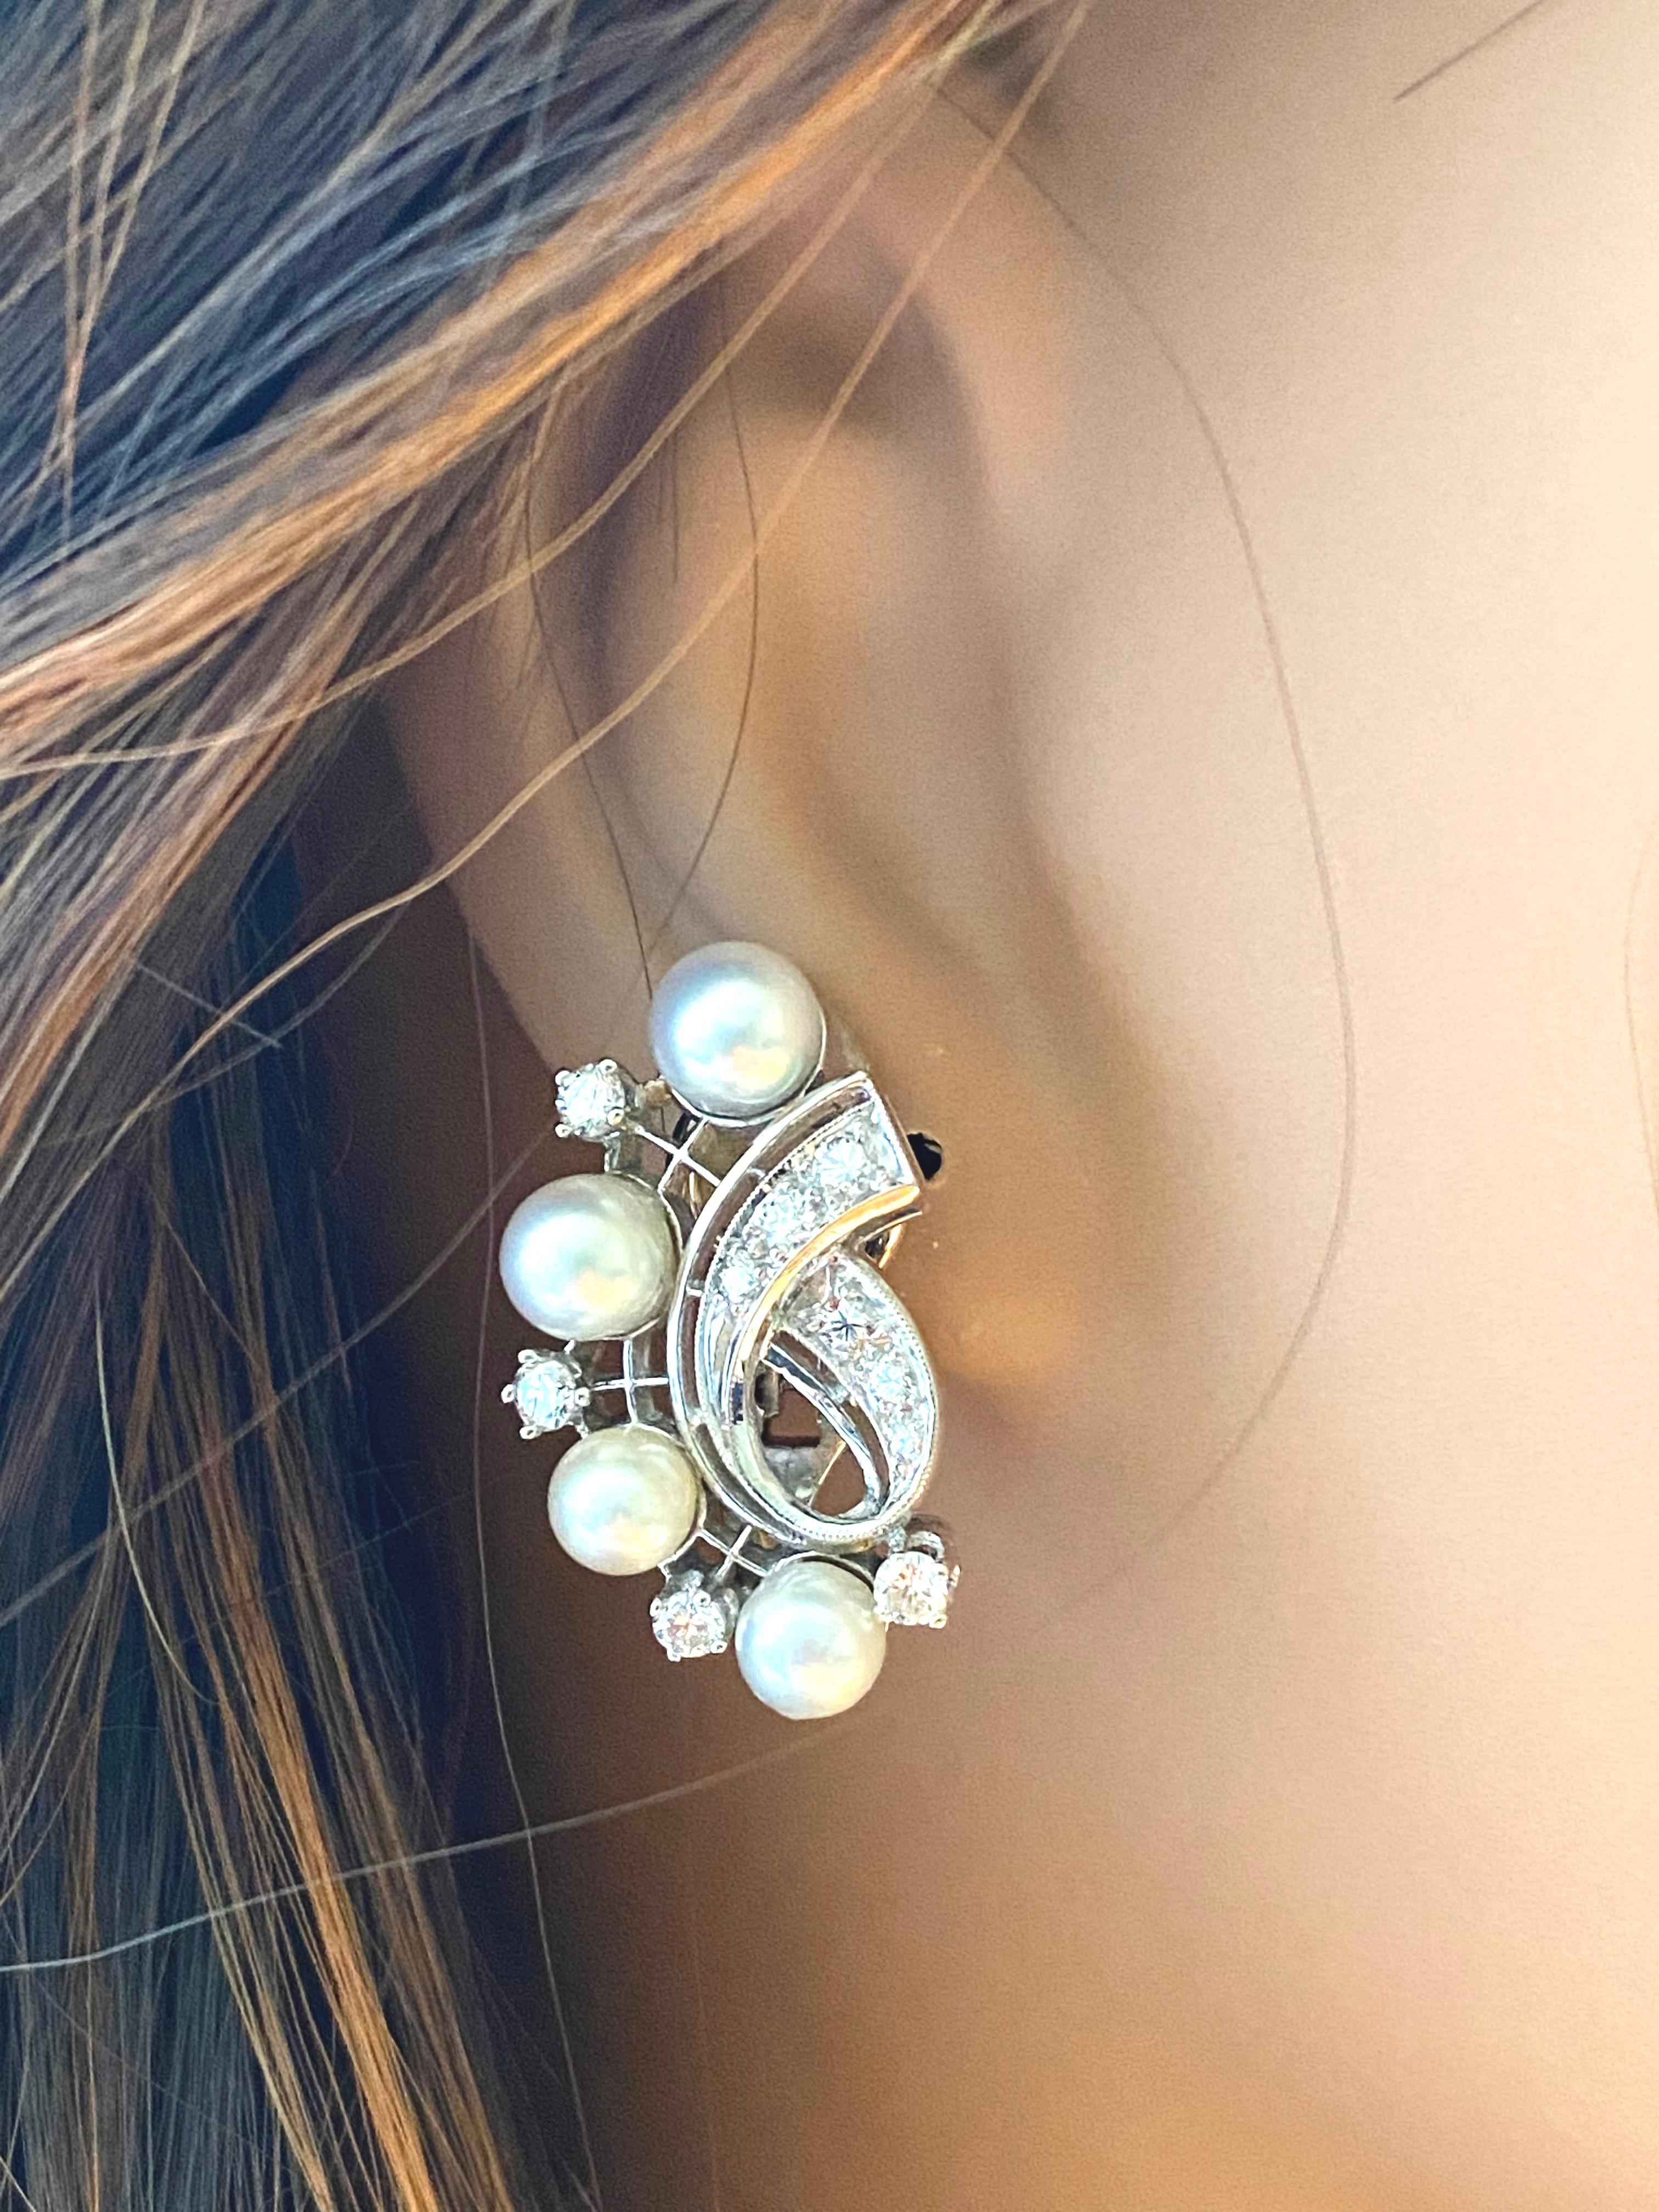 Introducing our exquisite Vintage Mid Century 14 Karat White Gold Diamonds and Pearls 0.75 Carat Clip On Earrings - a timeless piece that exudes elegance and sophistication. These one-inch earrings are a perfect blend of vintage charm and modern